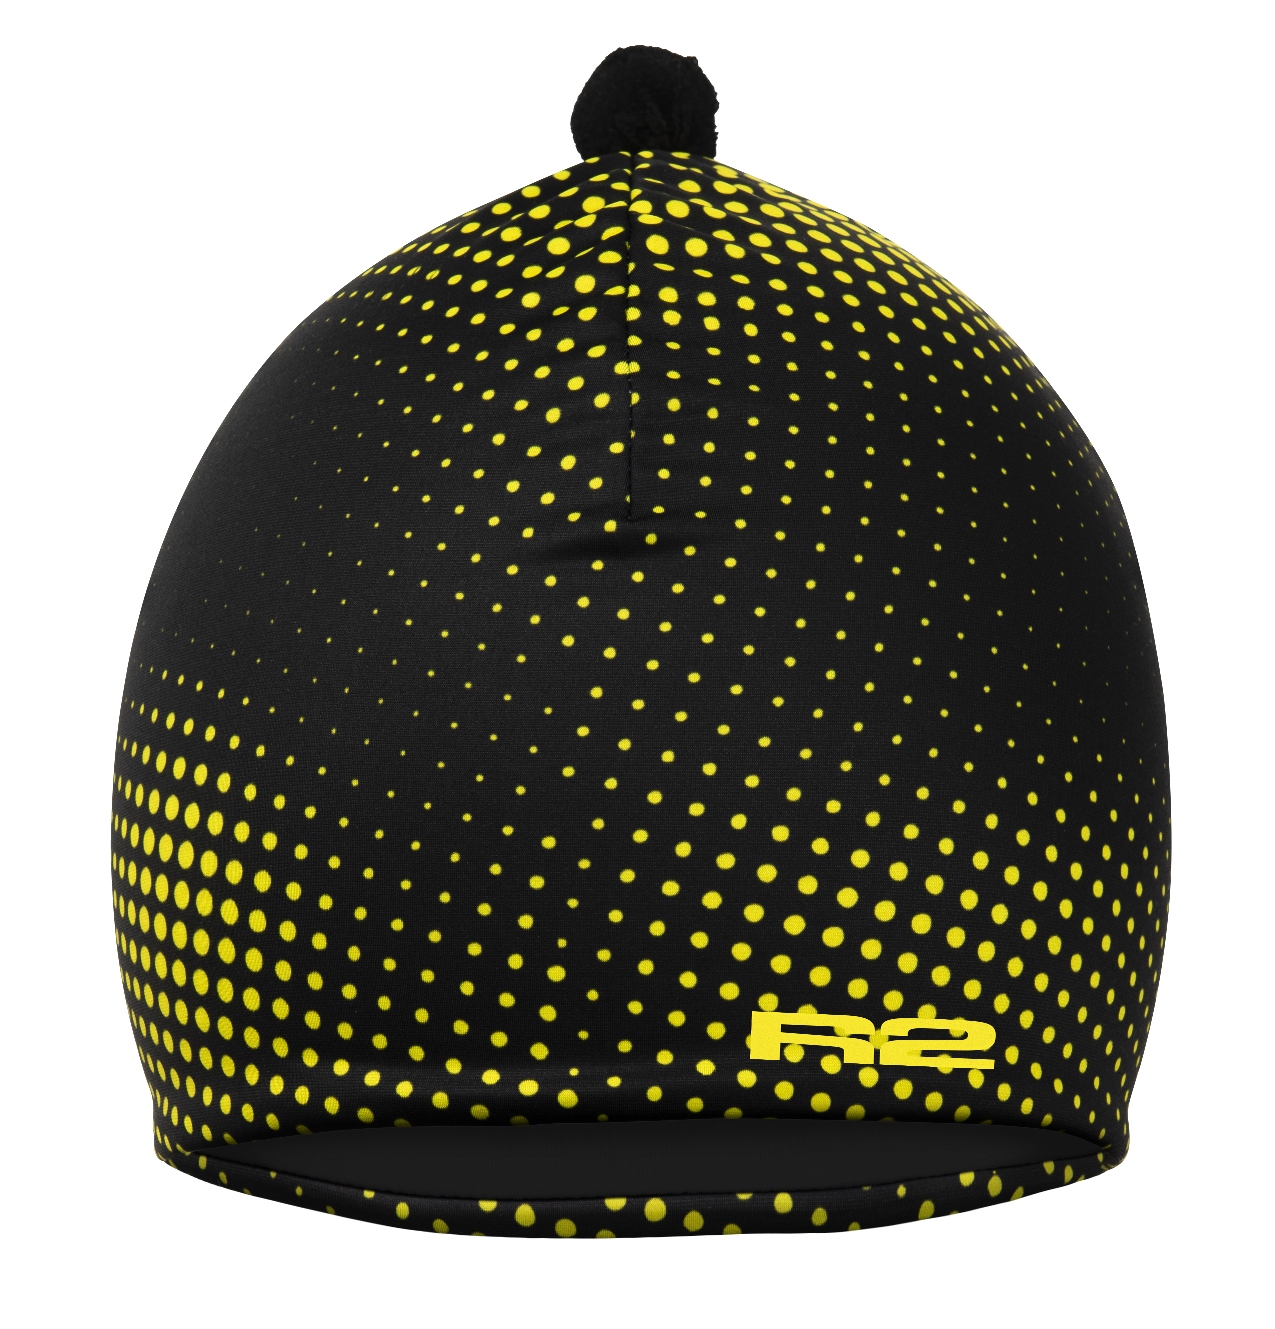 SPORTS FUNCTIONAL HAT R2 POINT  ATK11C